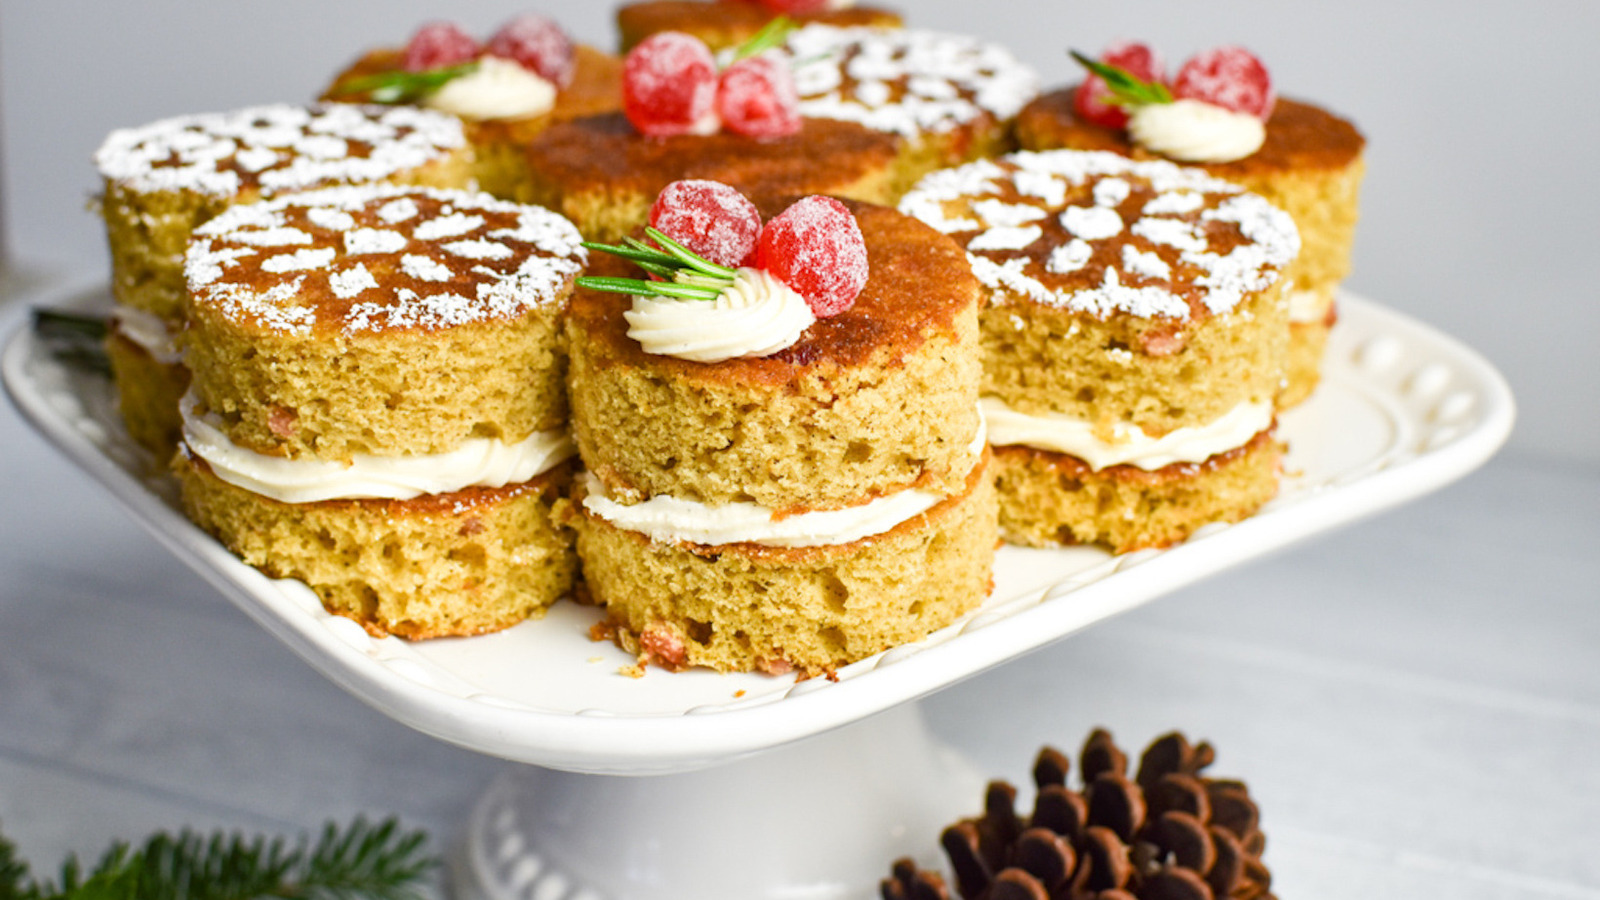 558,663 Christmas Cake Images, Stock Photos & Vectors | Shutterstock